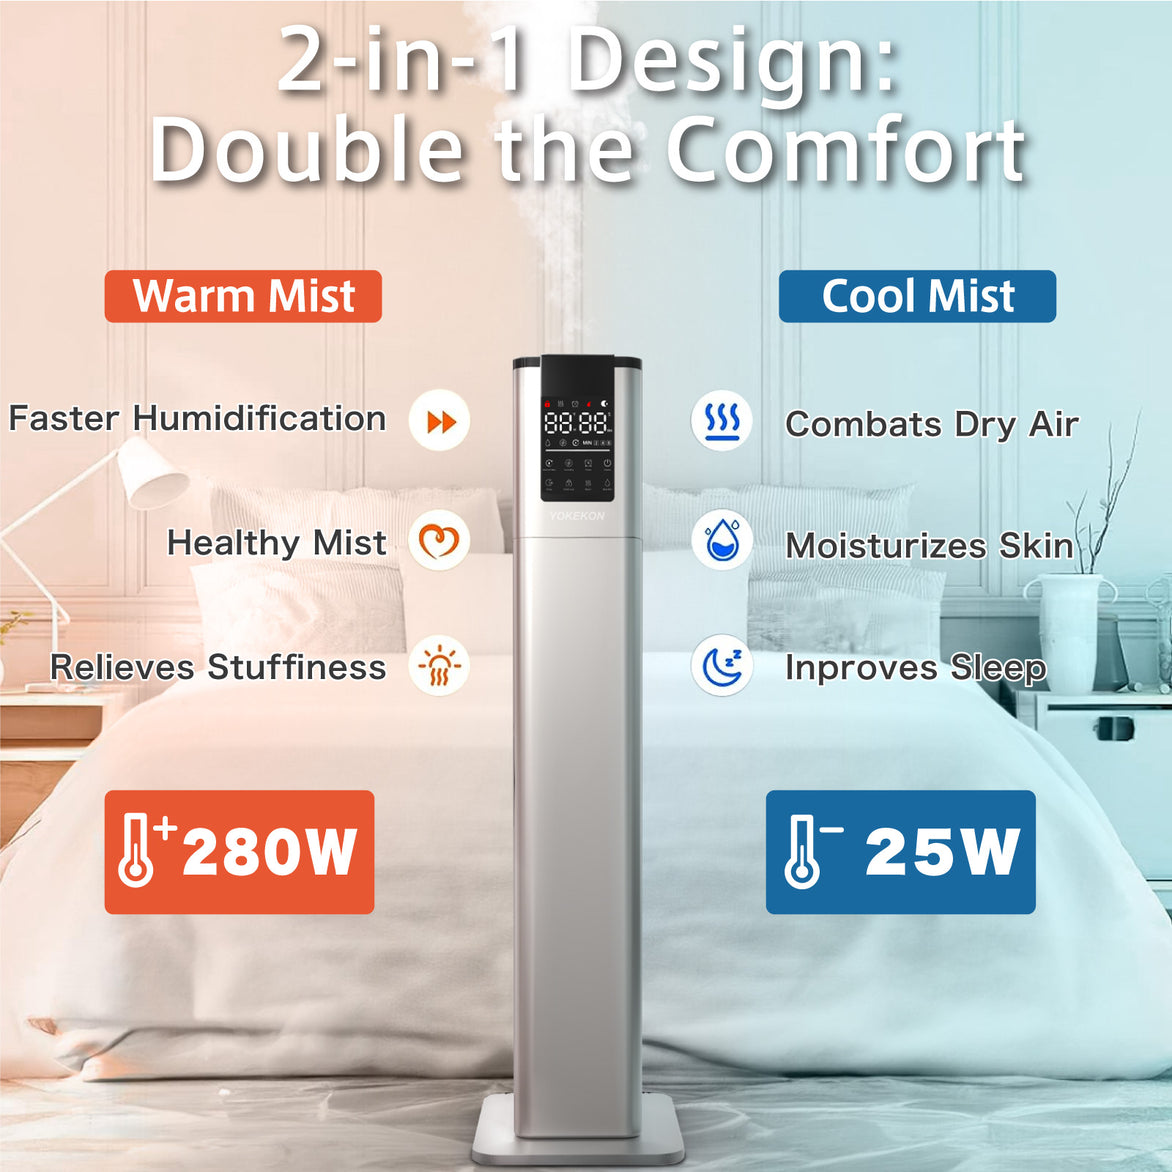 Cool and Warm Mist Humidifiers for Bedroom Large Room, YOKEKON 3.4Gal/13L Floor Humidifiers for Home 1000 sq ft, Quickly & Evenly Humidify Whole House, Top Fill, Aroma Box, Baby Yoga Plants, Silver